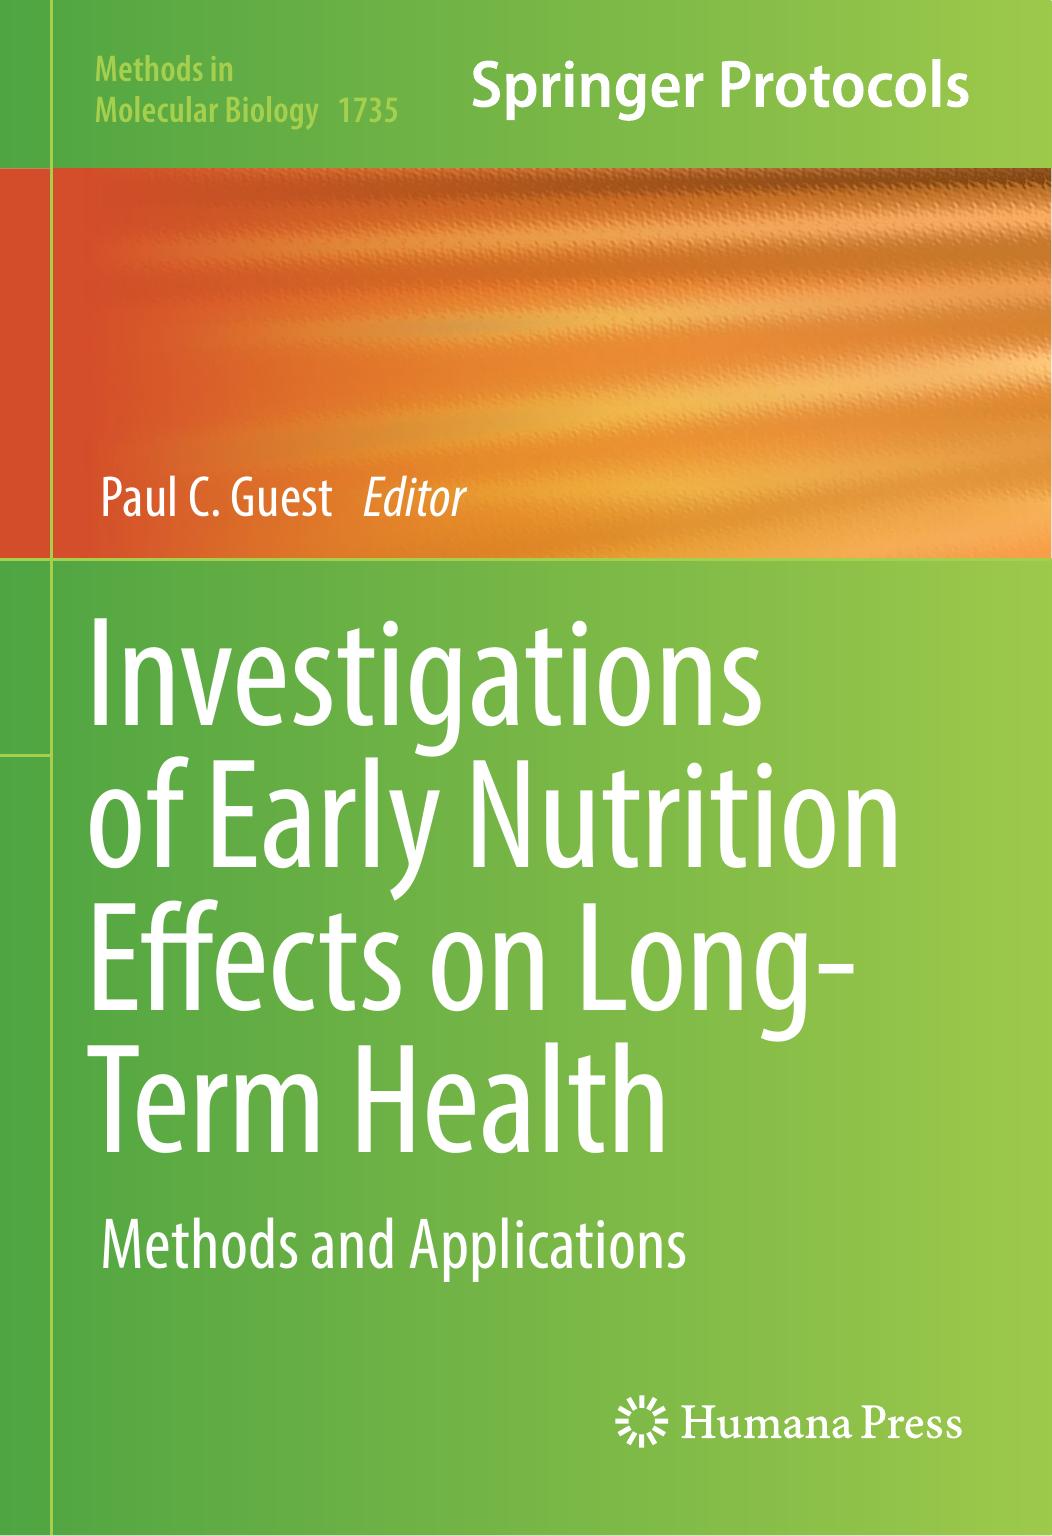 Investigations of Early Nutrition Effects on Long-Term Health Methods and Applications 2018